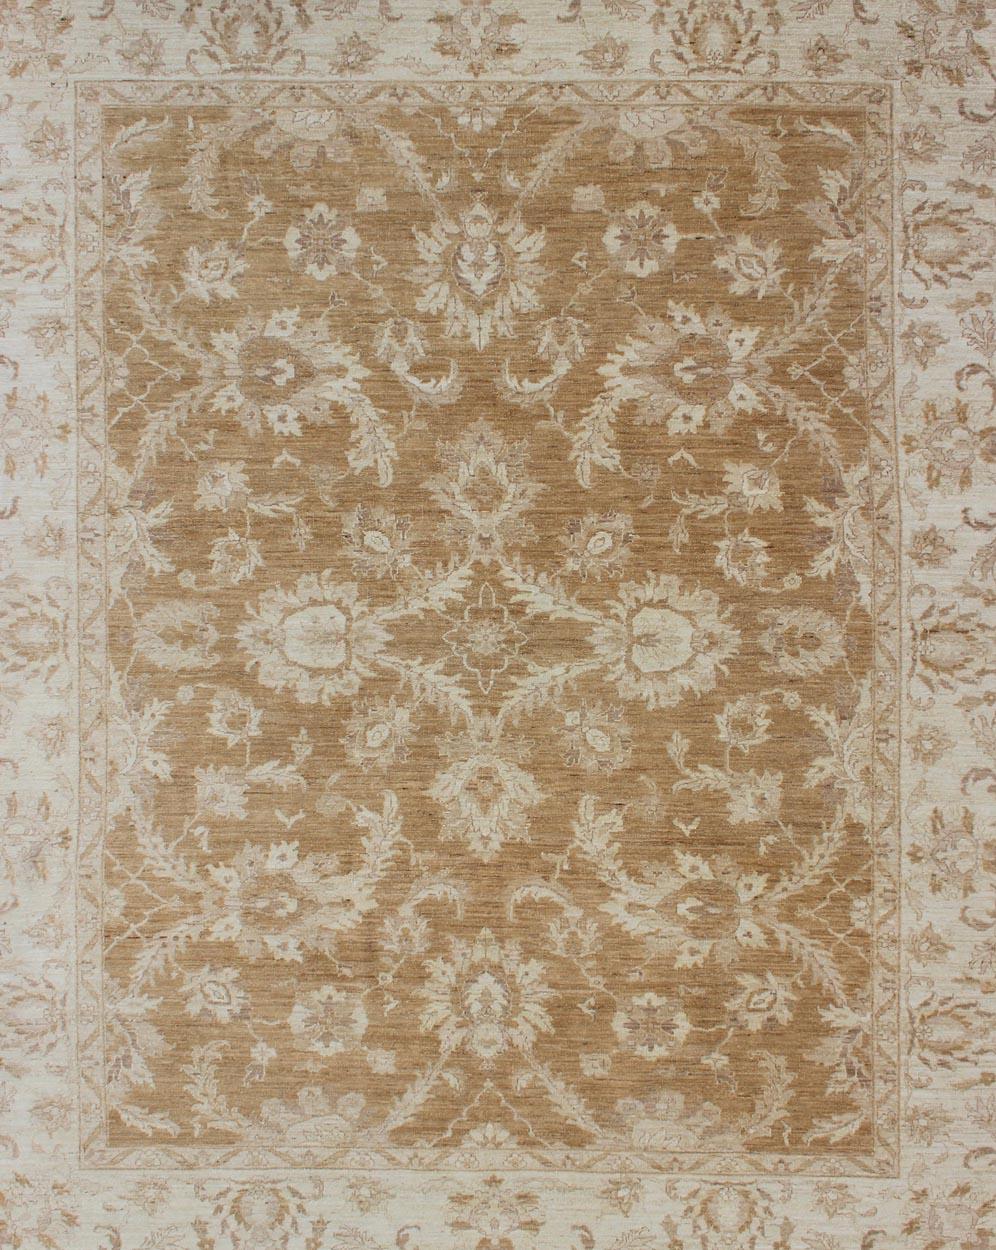 Cream and Caramel floral Sultanabad design rug, DSP-BC11322 country of origin / type: Afghanistan / circa 1980.

This elegantly handwoven rug is from Afghanistan and woven from the finest wool to create a soft and luxurious piece that will work